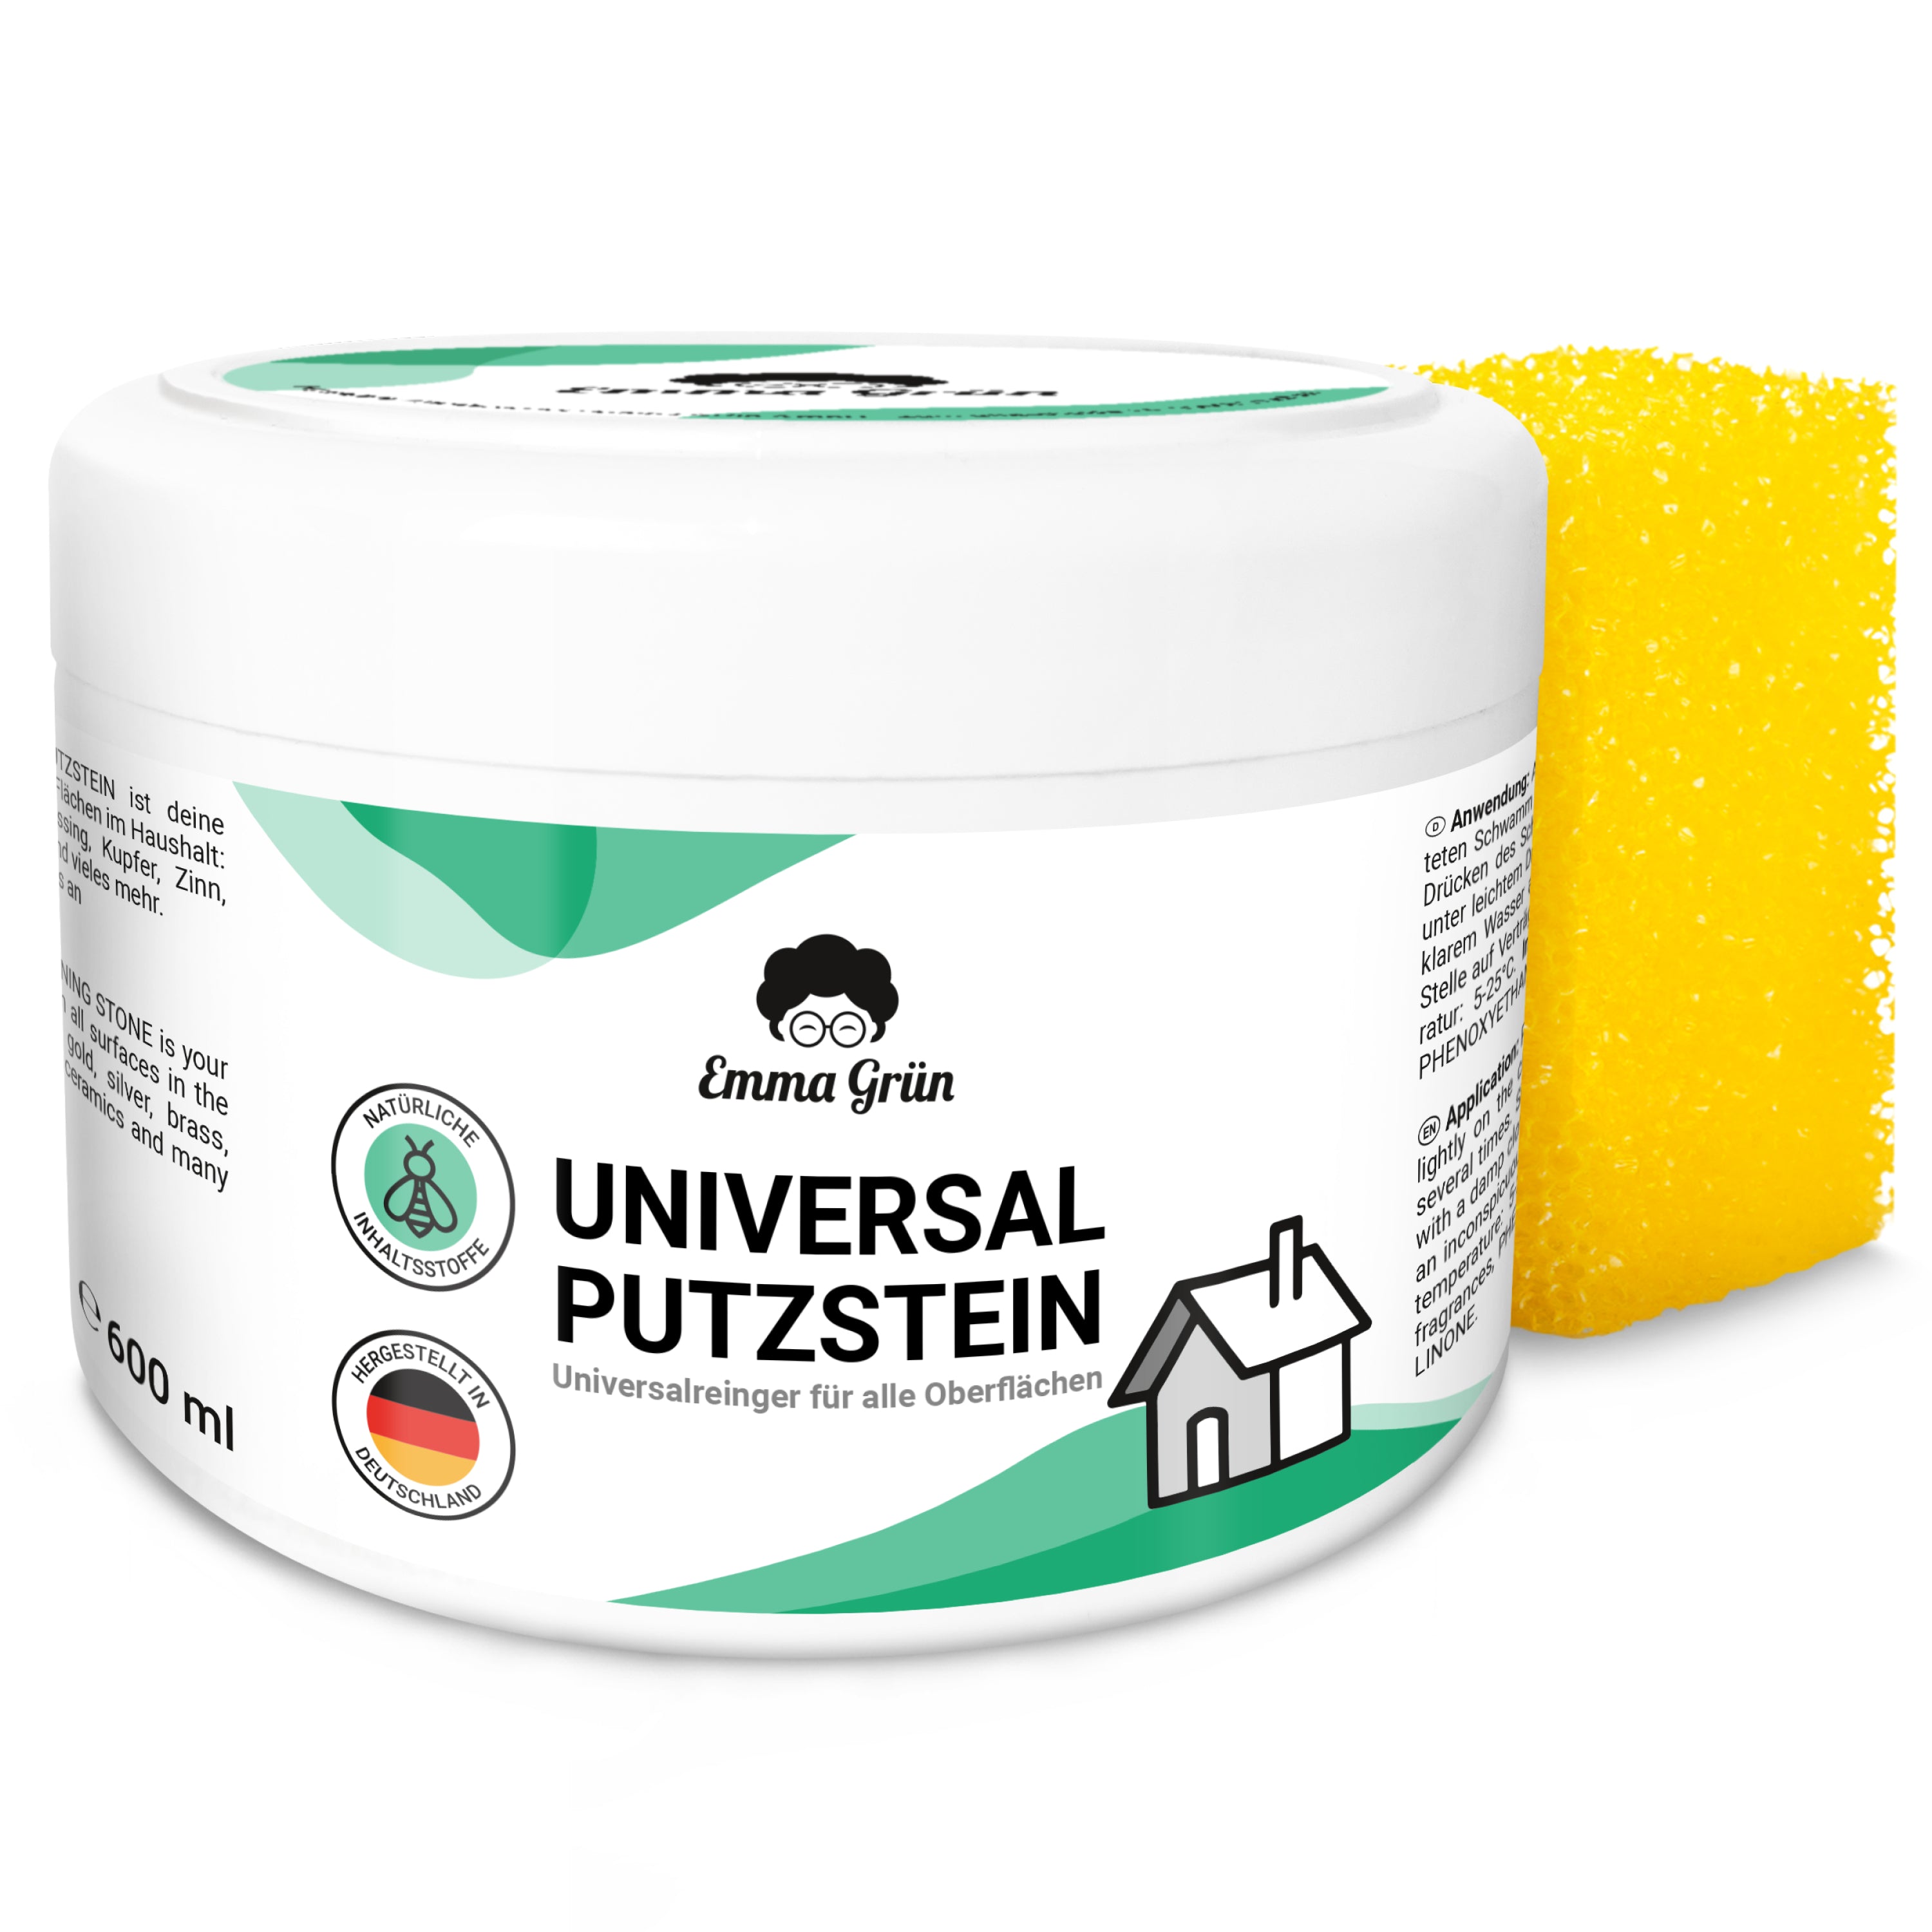 Cleaning stone 900 g against heavy soiling, universal stone for the household 